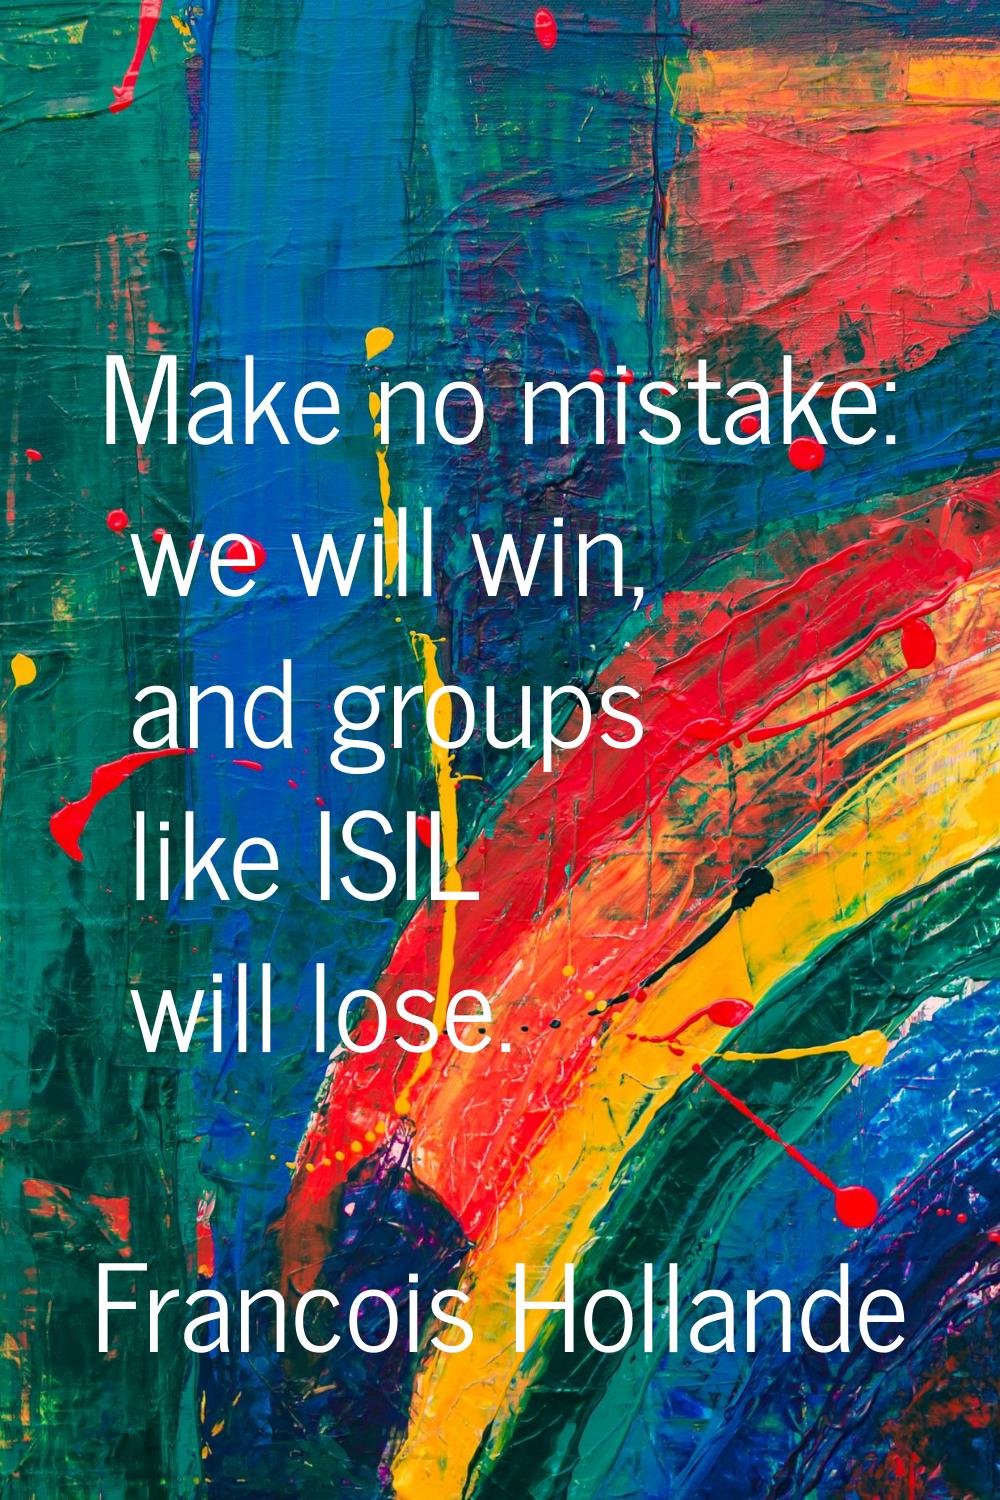 Make no mistake: we will win, and groups like ISIL will lose.